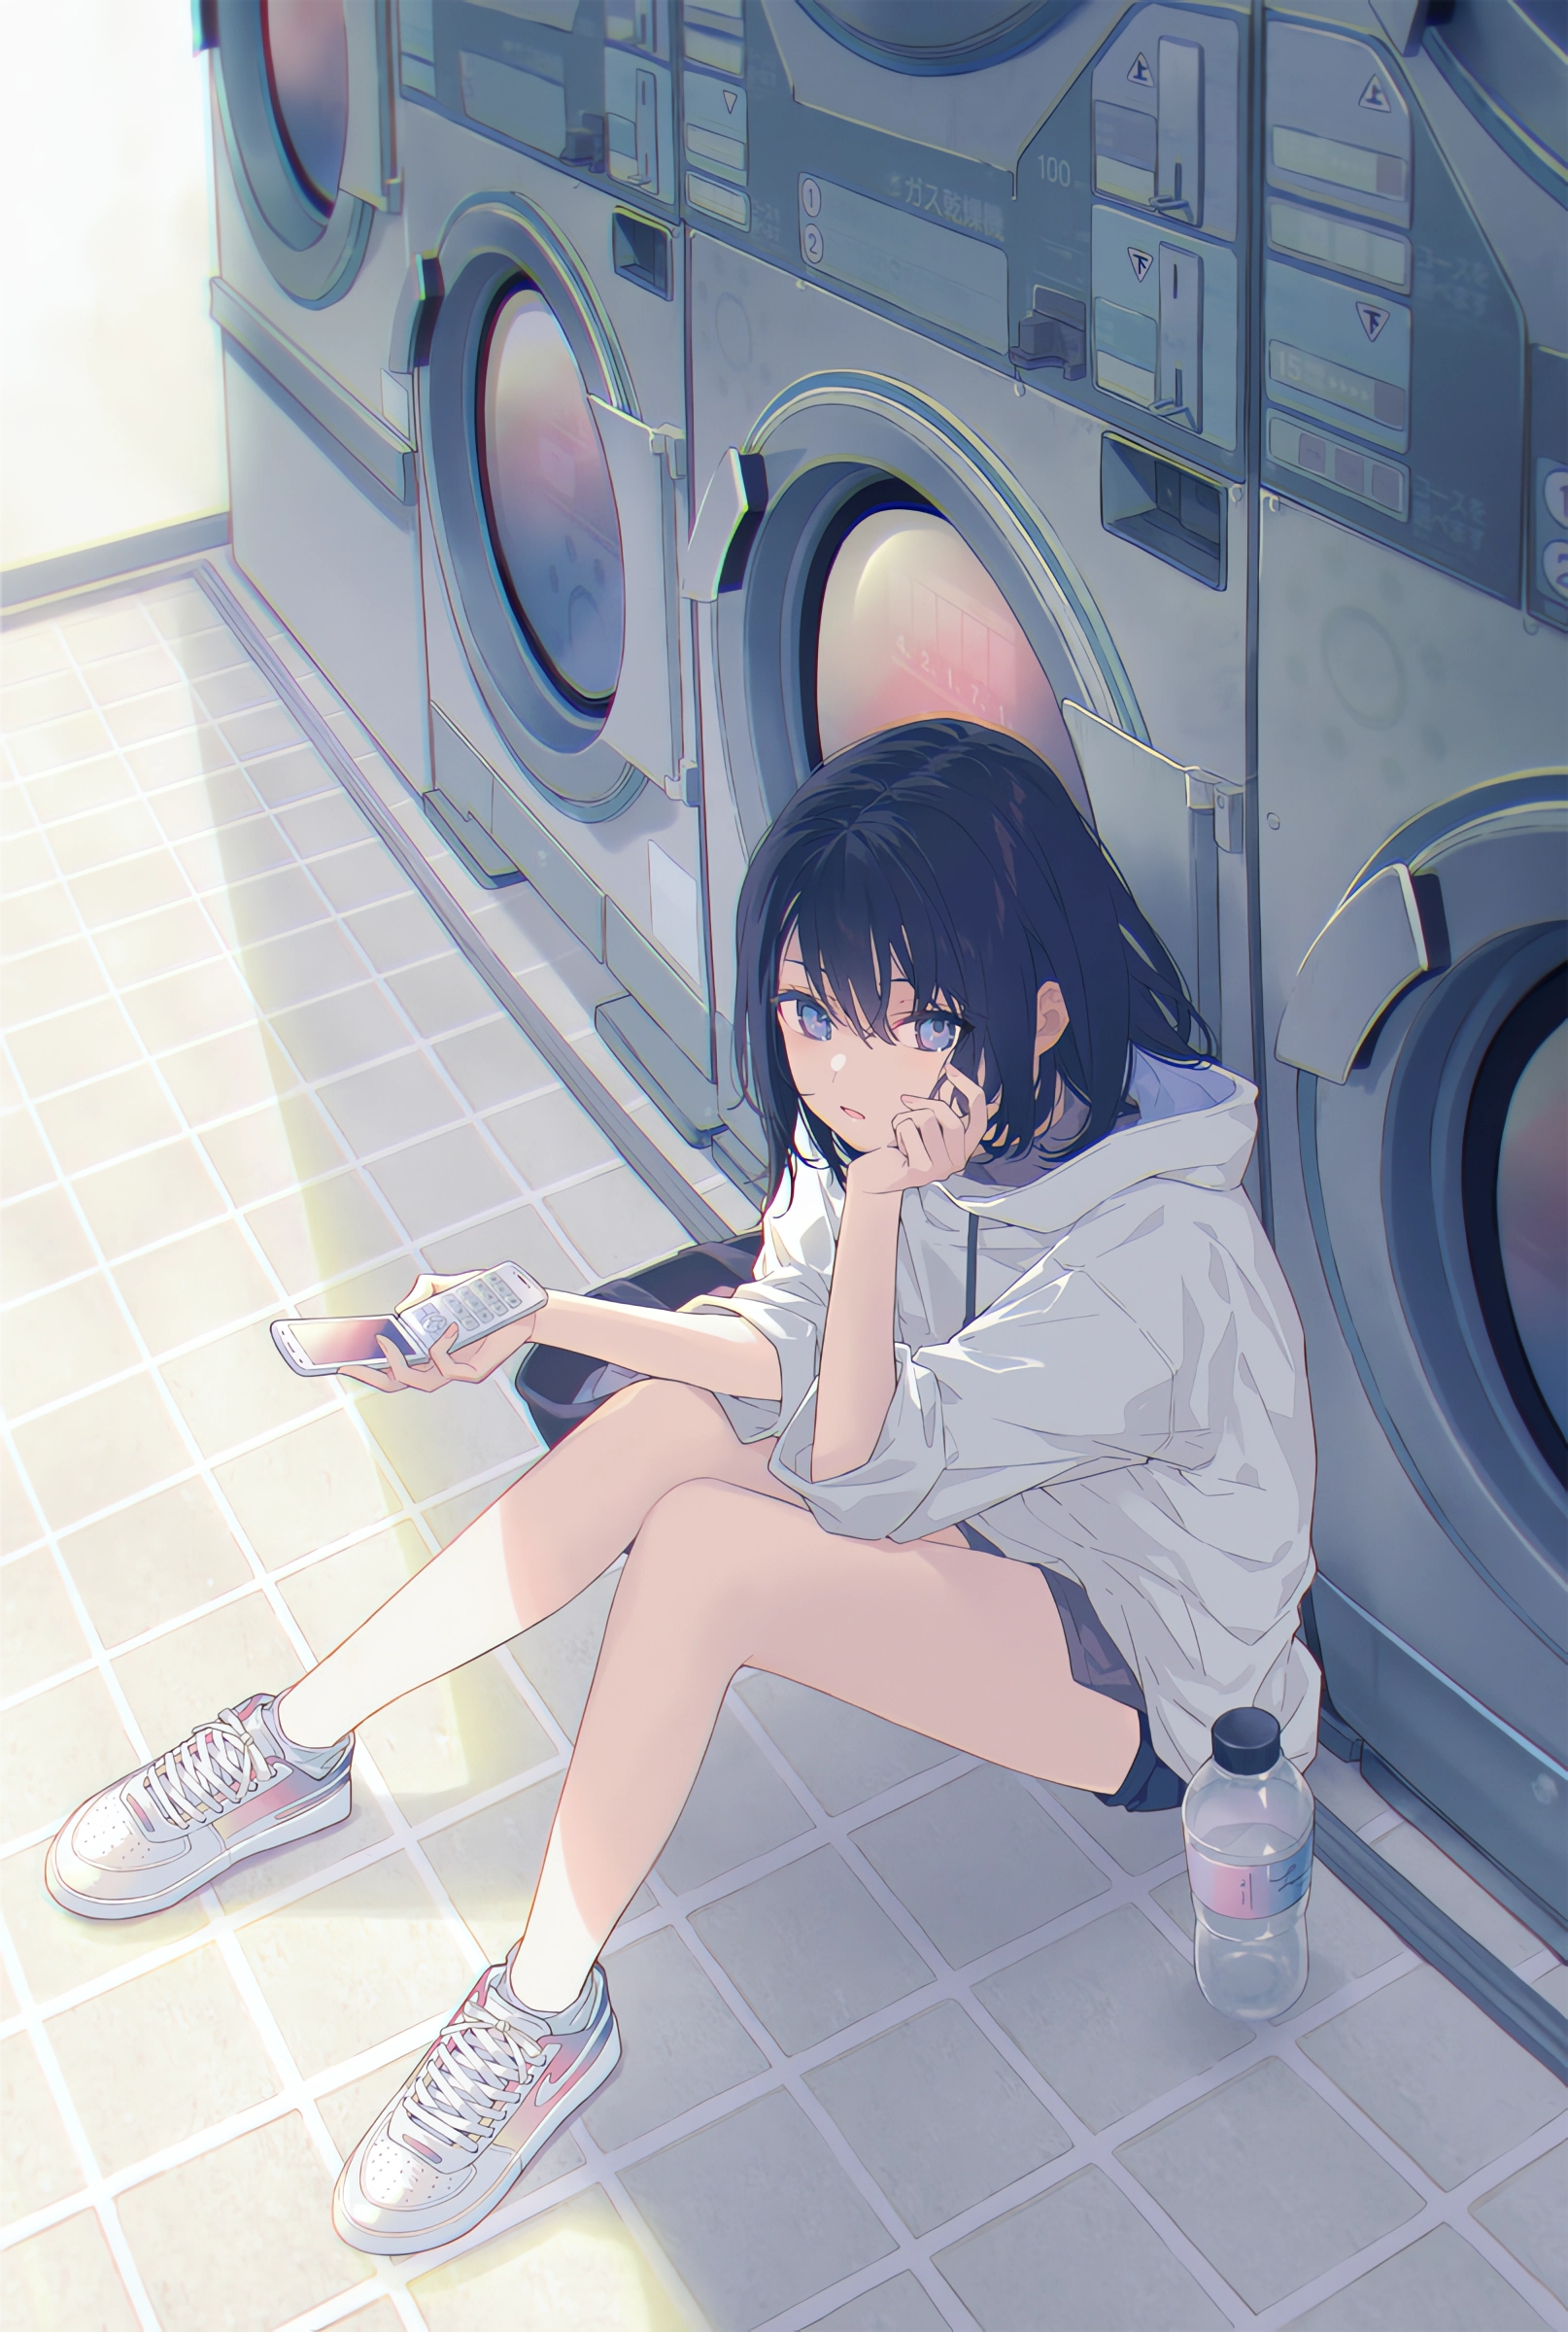 Anime Anime Girls Portrait Display Phone Washing Machine Short Hair Hand On Face Looking At Viewer W 1614x2400